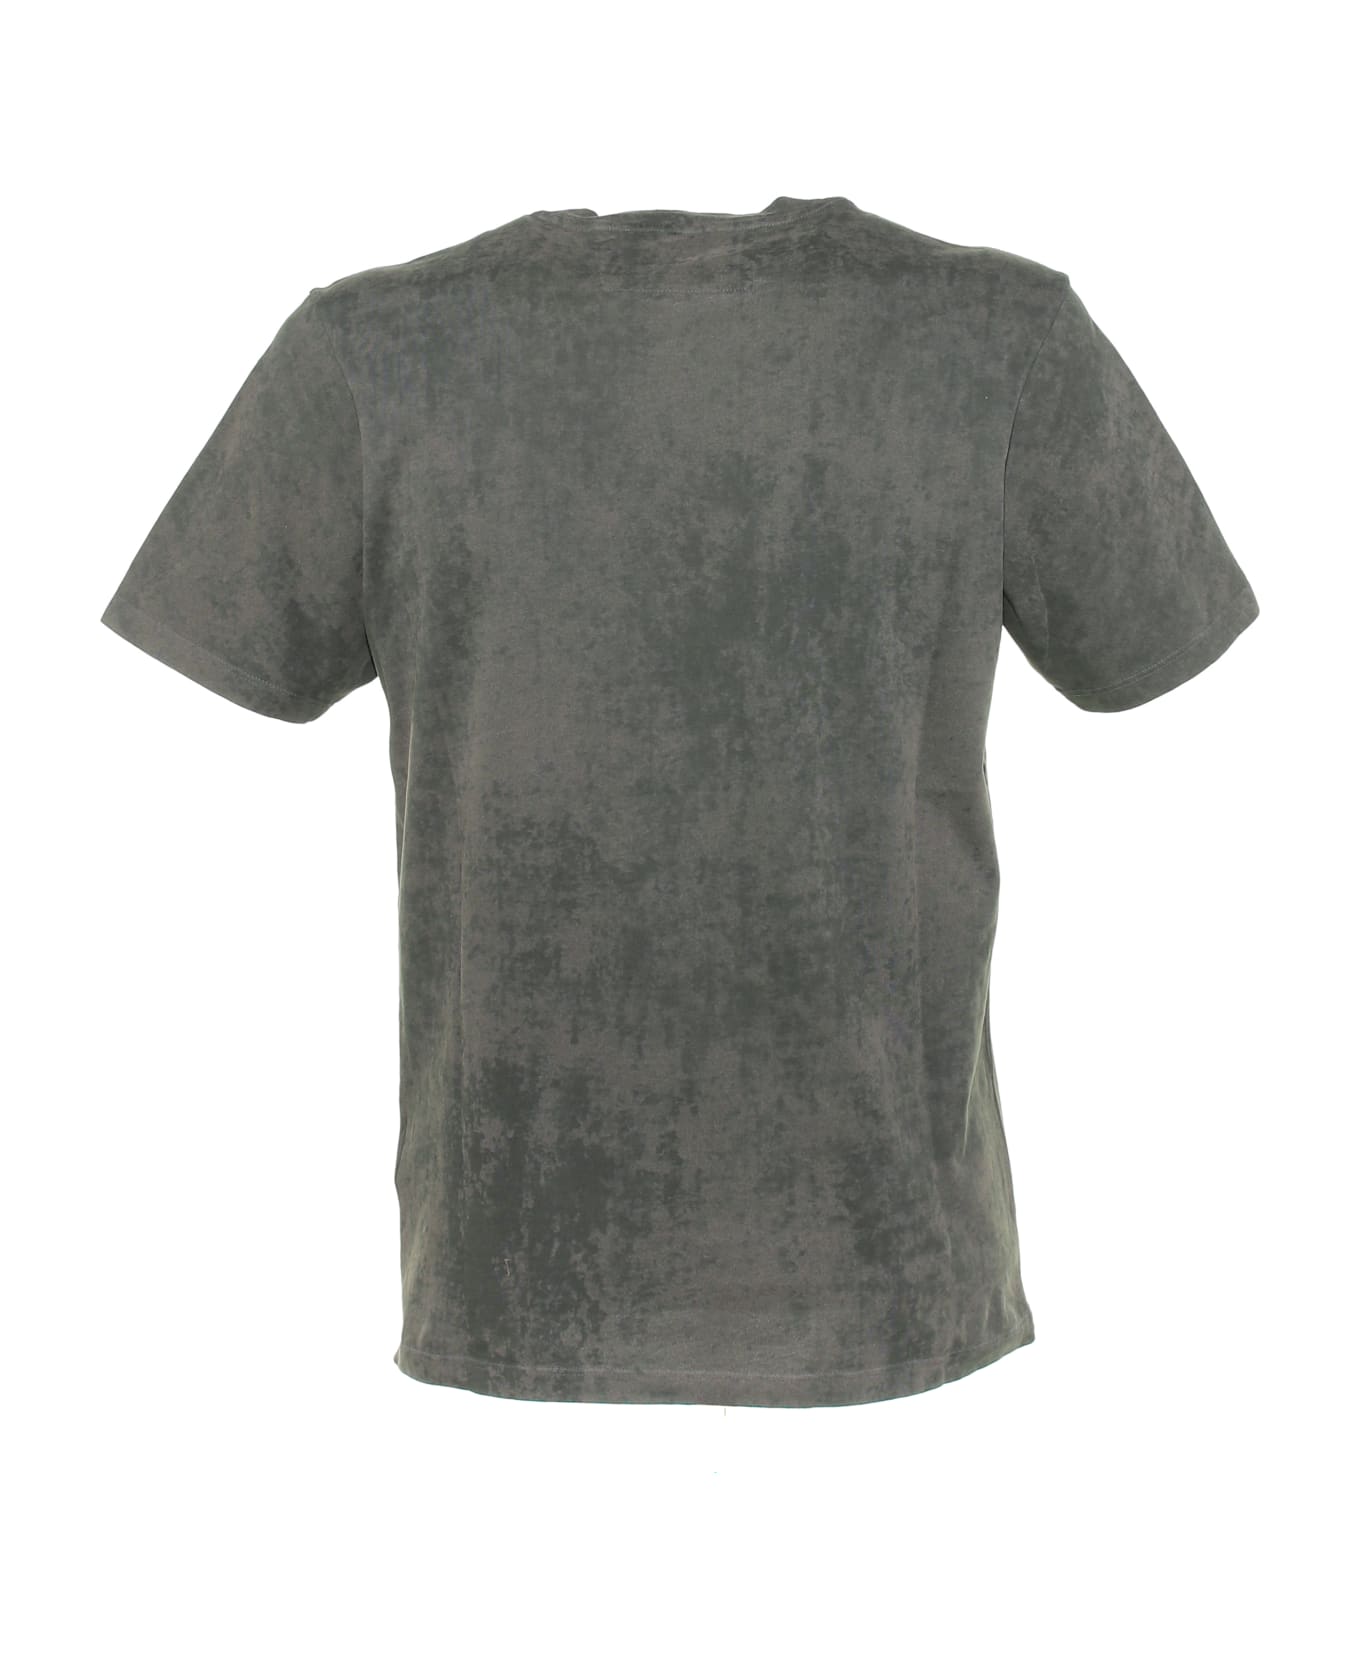 C.P. Company T-shirt With Contrasting Detail - TREATMENT 05